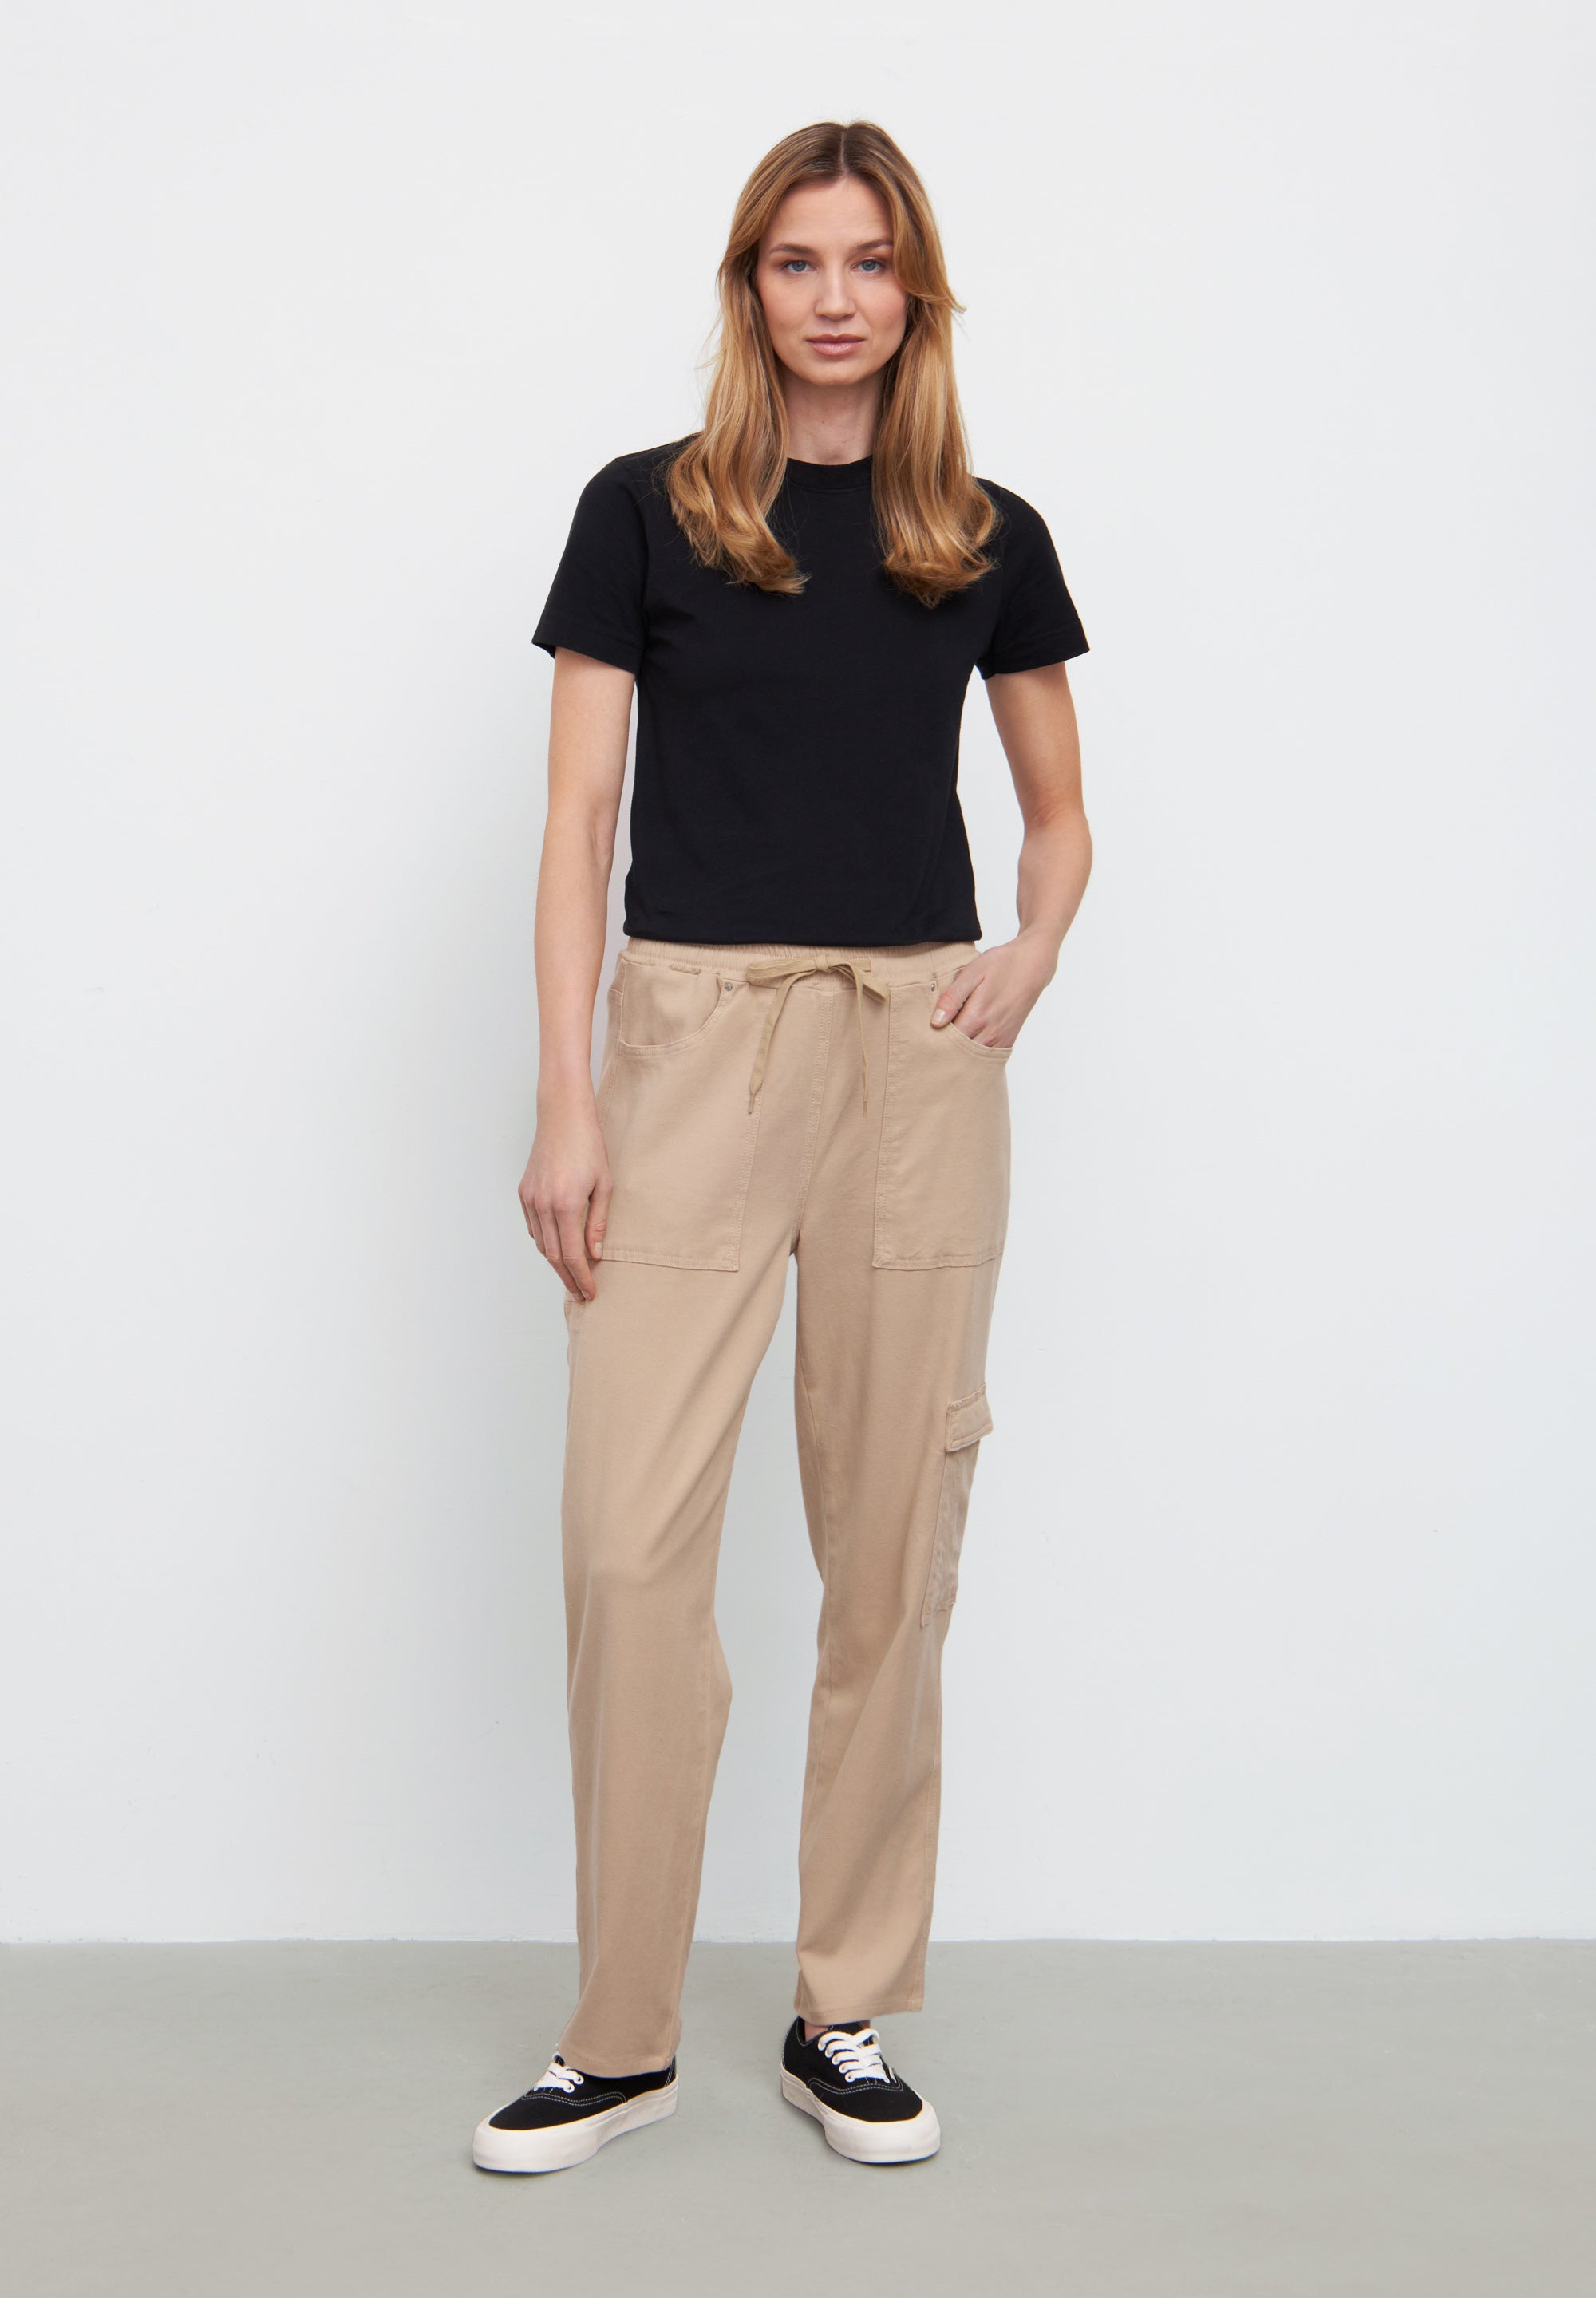 LAURIE  Ofelia Cargo Relaxed - Medium Length Trousers RELAXED 26000 Safari